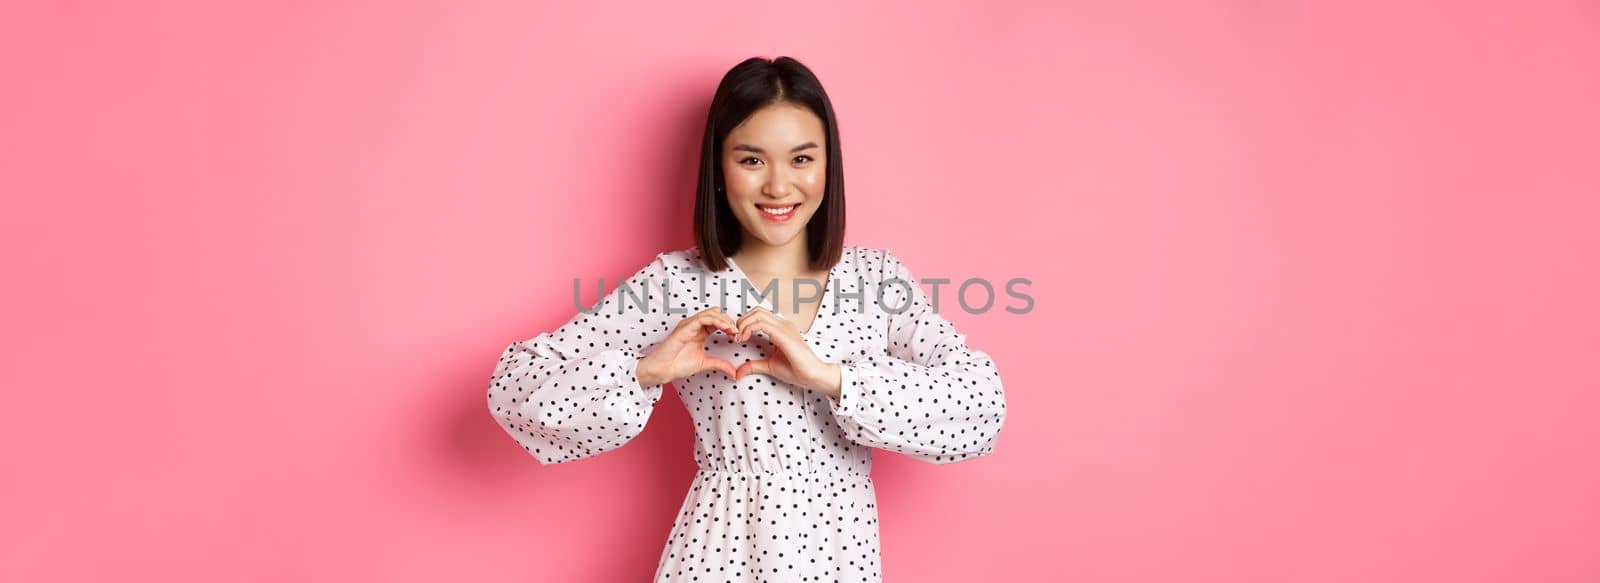 Romantic asian woman showing heart sign, I love you gesture, smiling cute at camera, standing in dress over pink background.